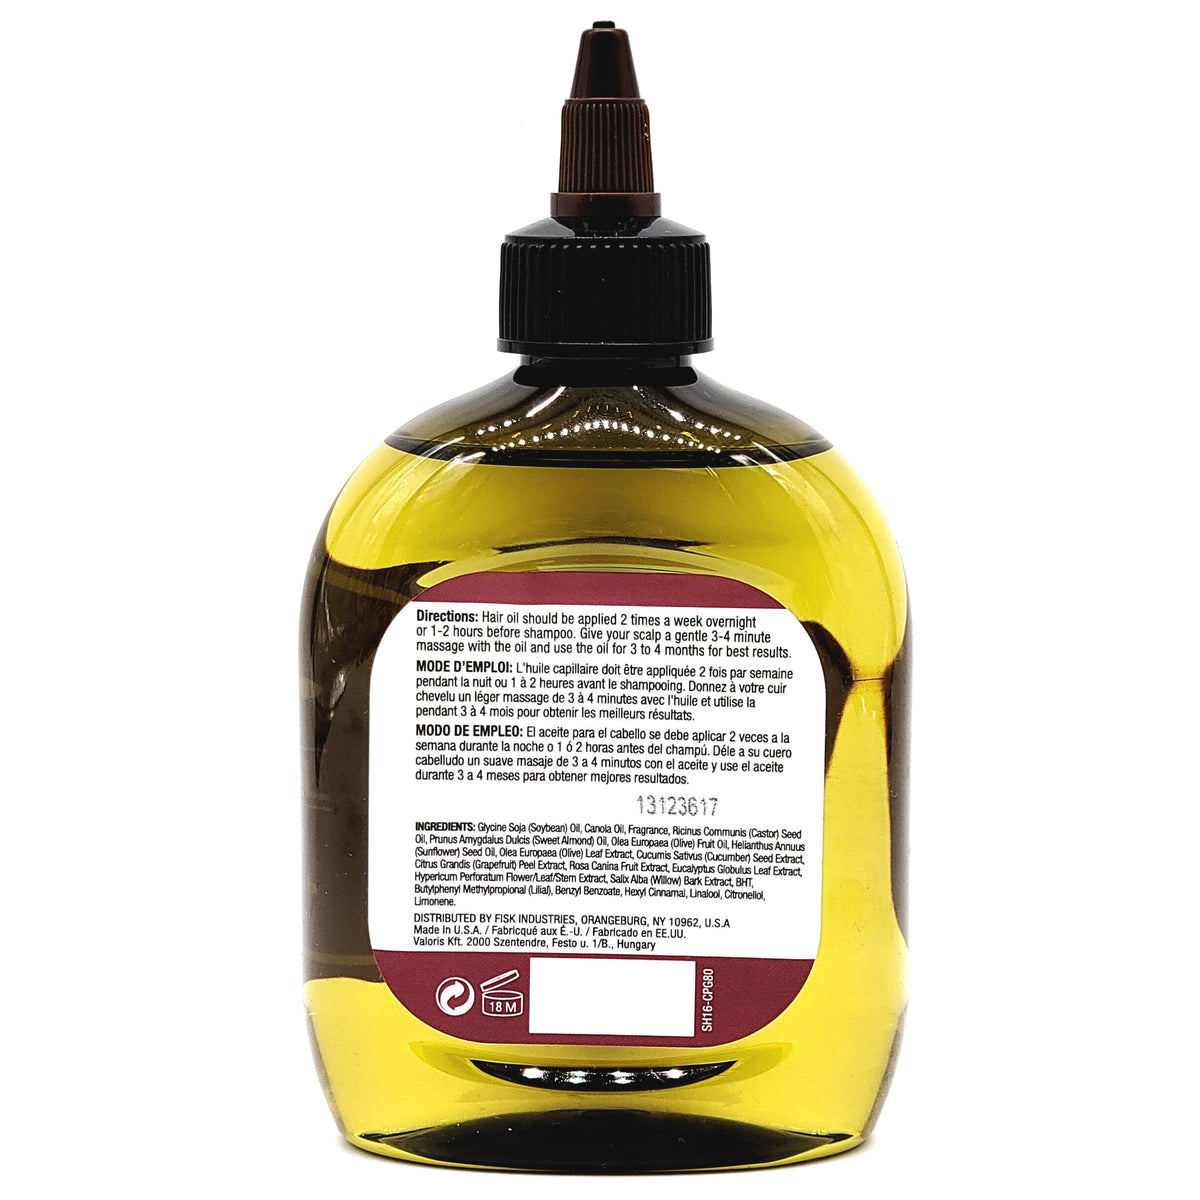 Difeel Castor Pro-Growth Hair Oil 7.1 oz. by difeel - find your natural beauty